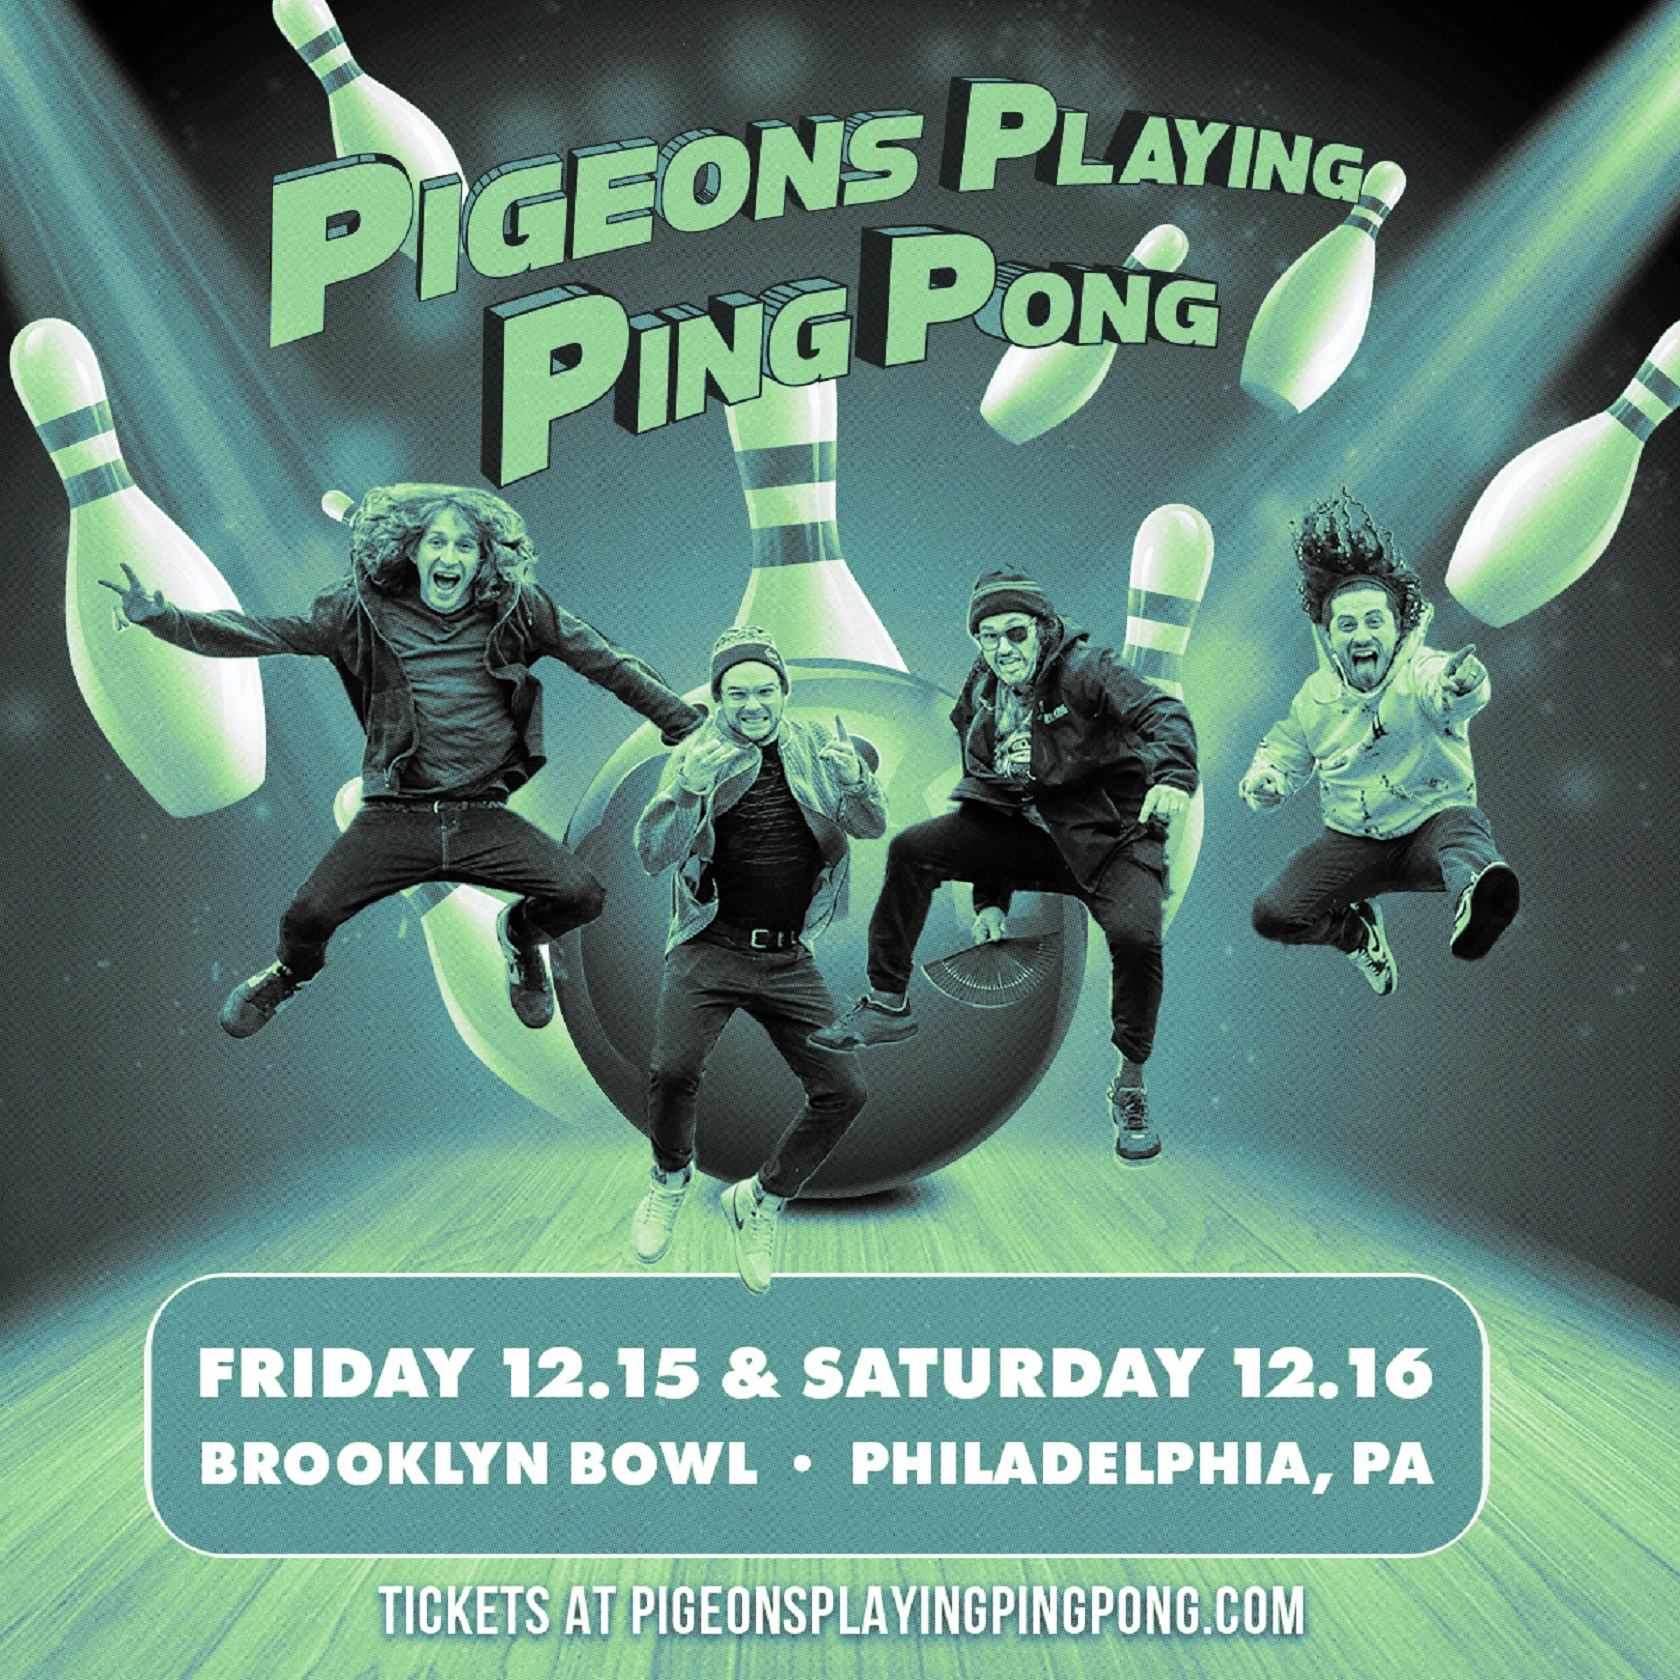 PIGEONS PLAYING PING PONG ANNOUNCES TWO NIGHTS AT BROOKLYN BOWL PHILADELPHIA IN DECEMBER